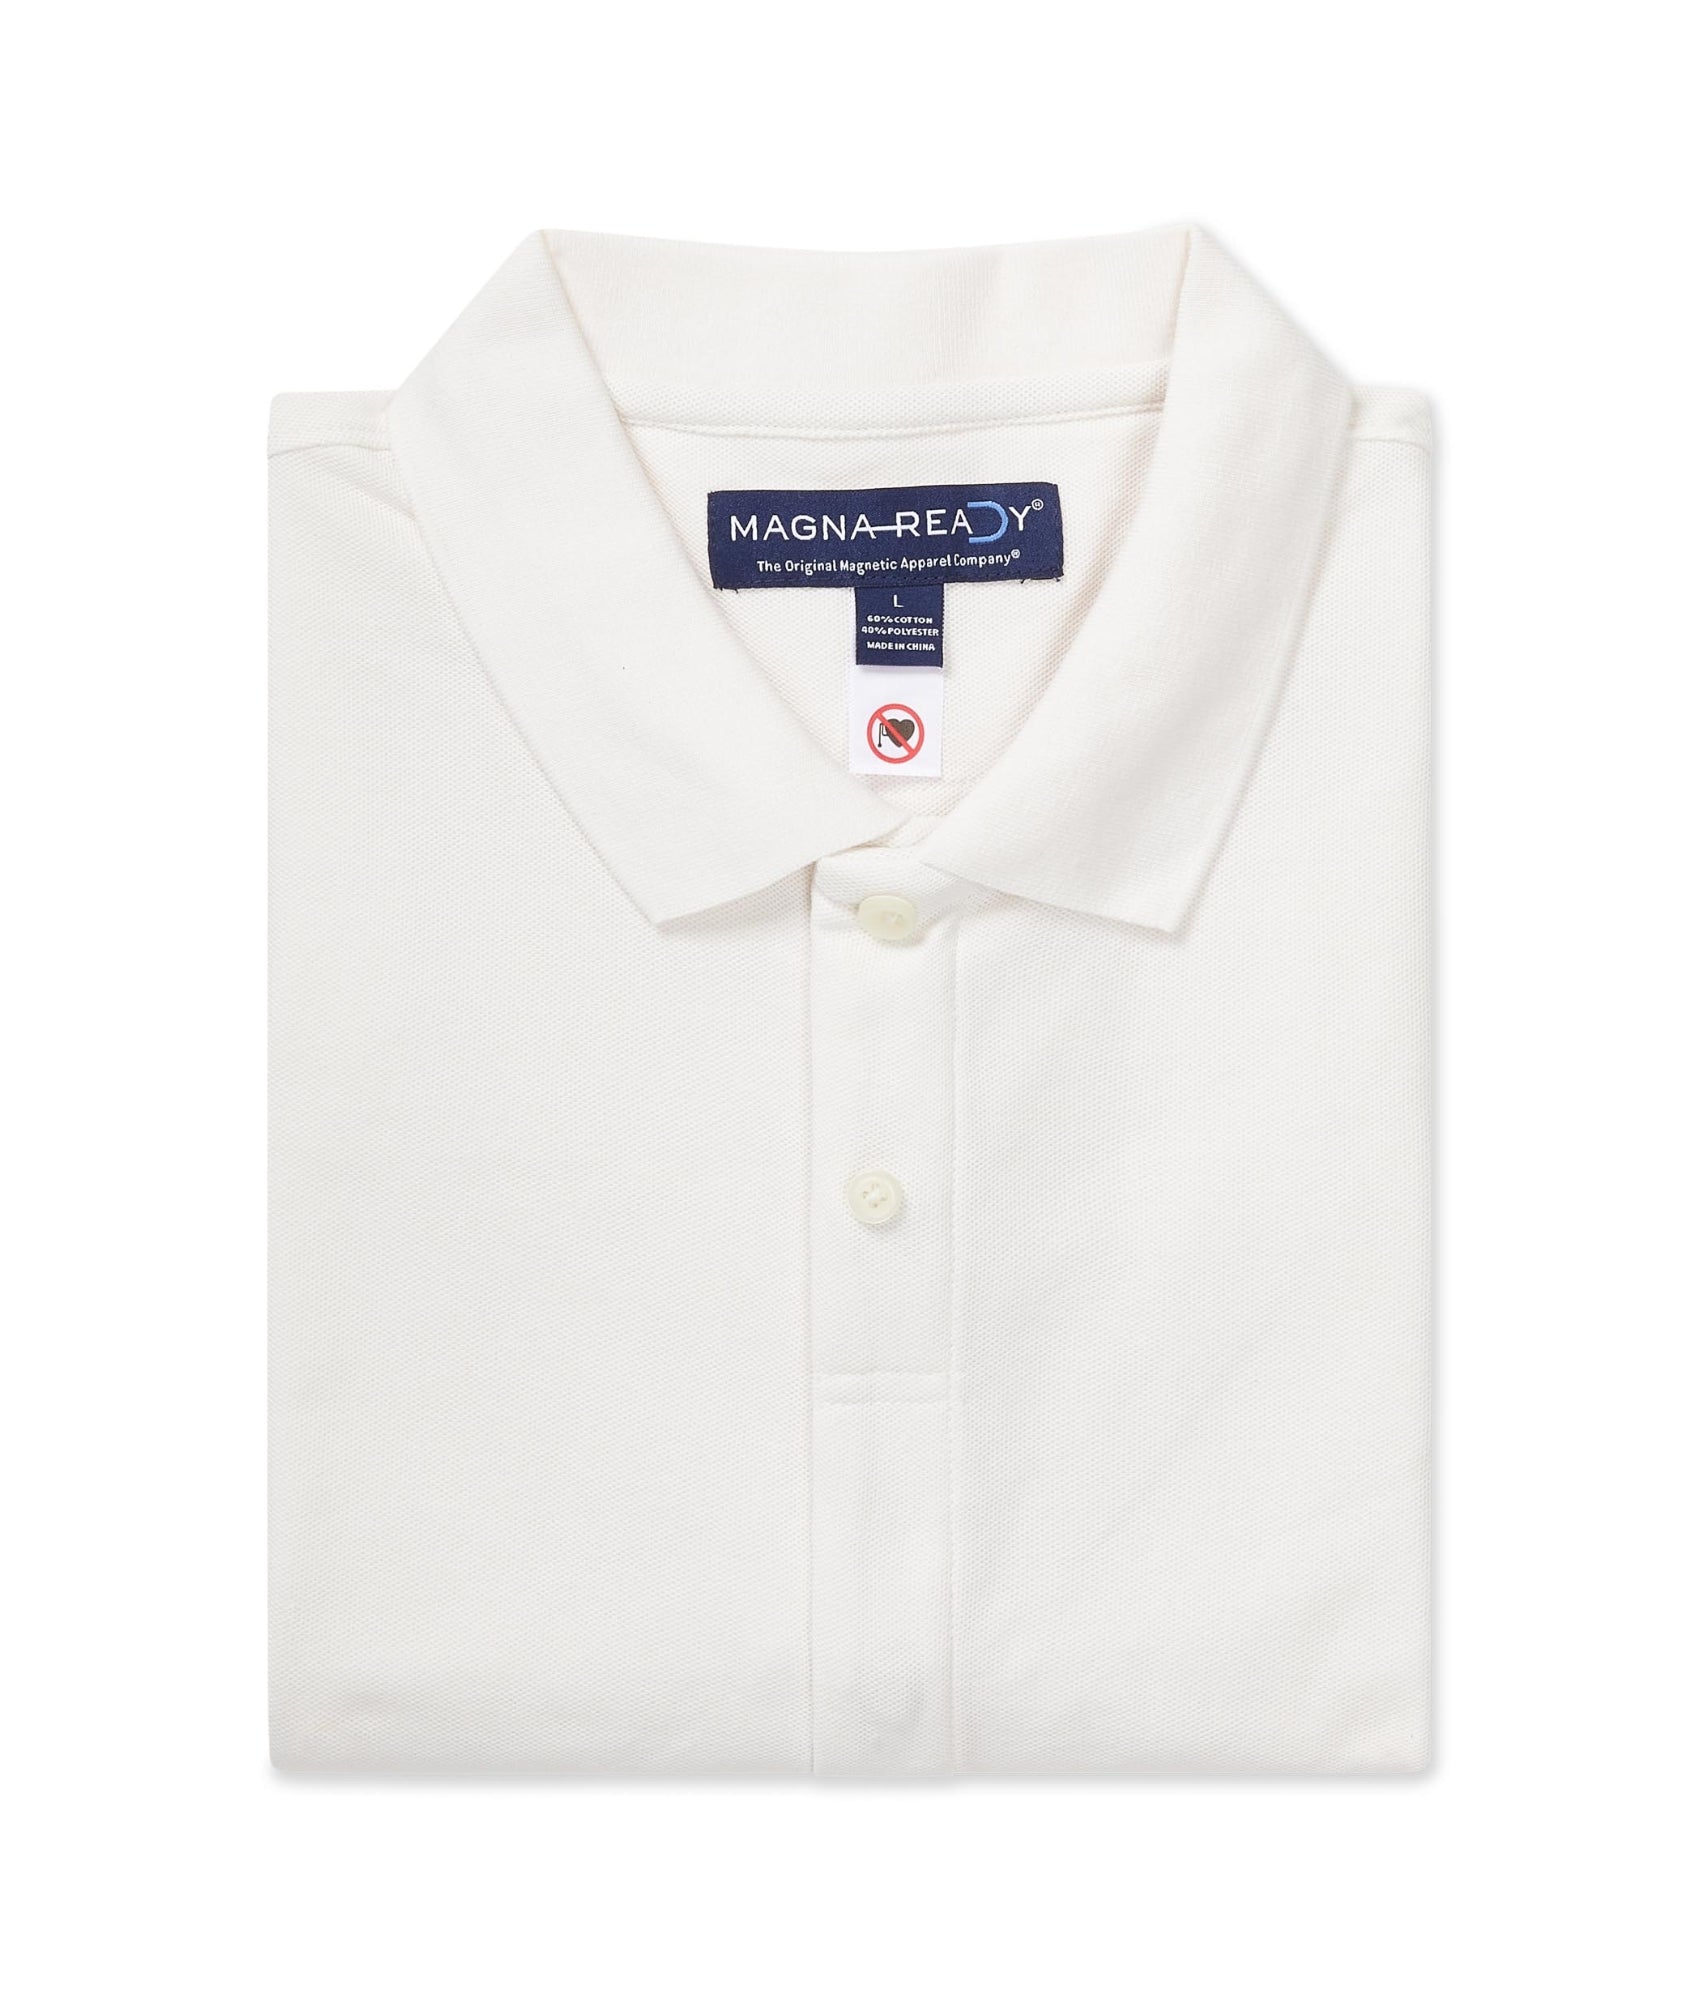 MagnaReady® and Brooks Brothers Debut First Adaptive Button-Down